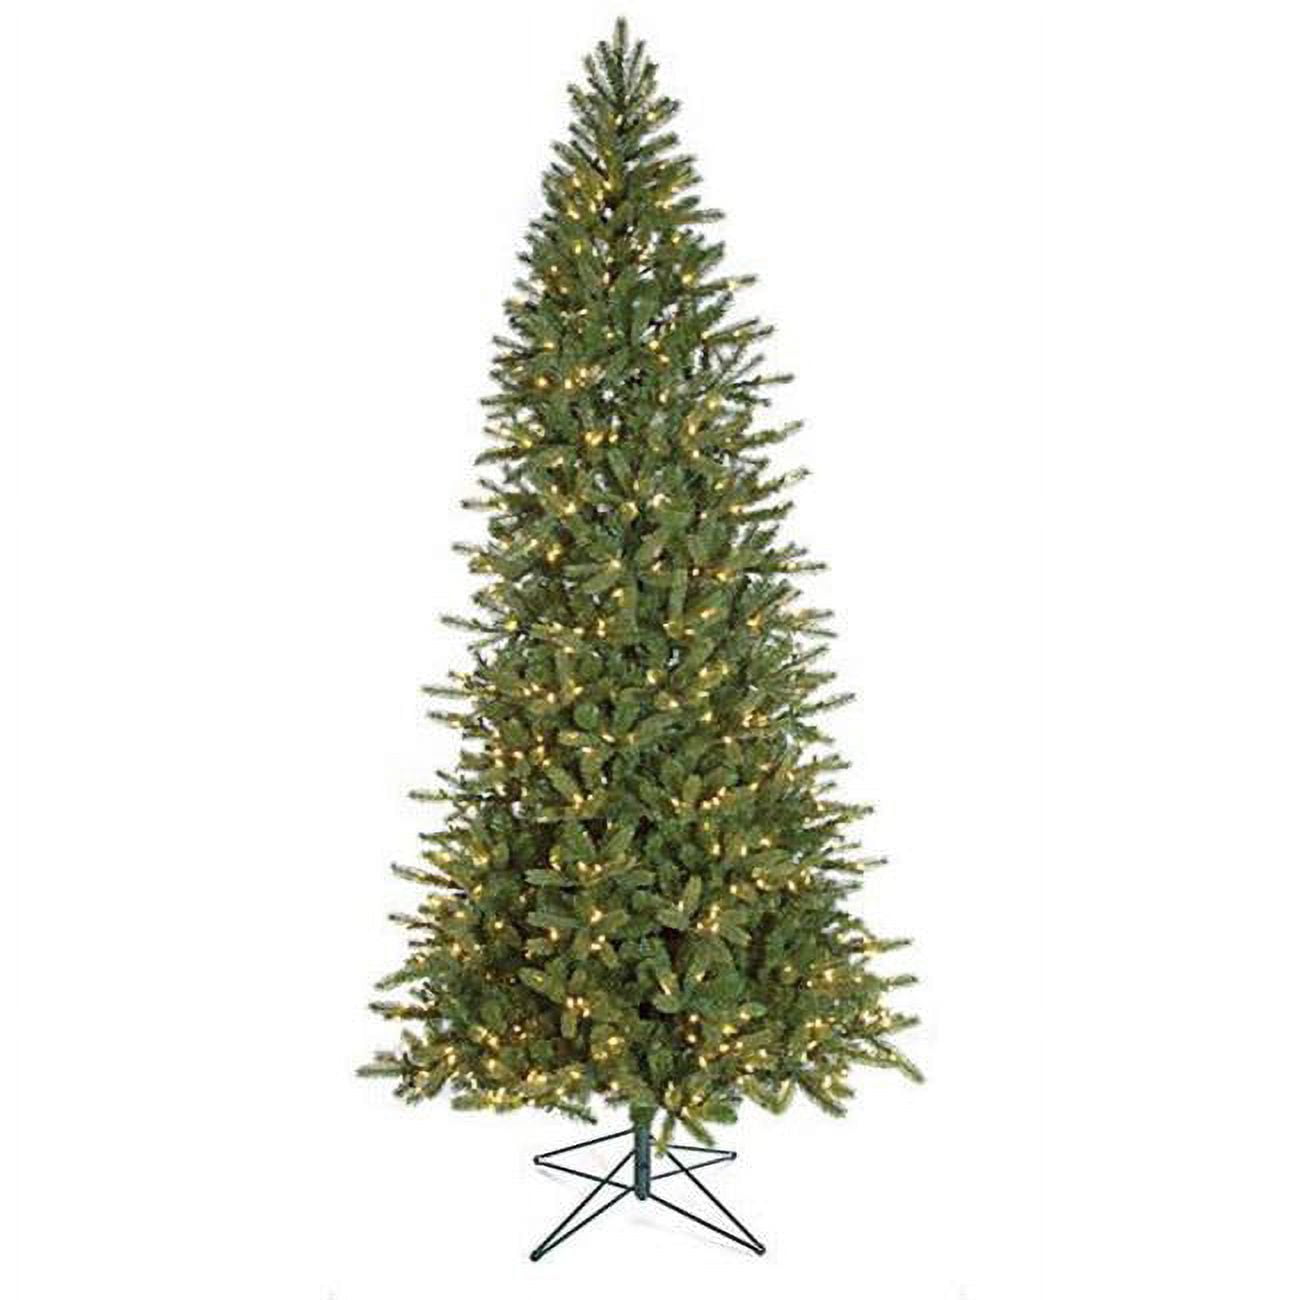 Picture of Autograph Foliages C-121120-1 12 ft. Slim Spruce Tree, Green - Lights Not Included